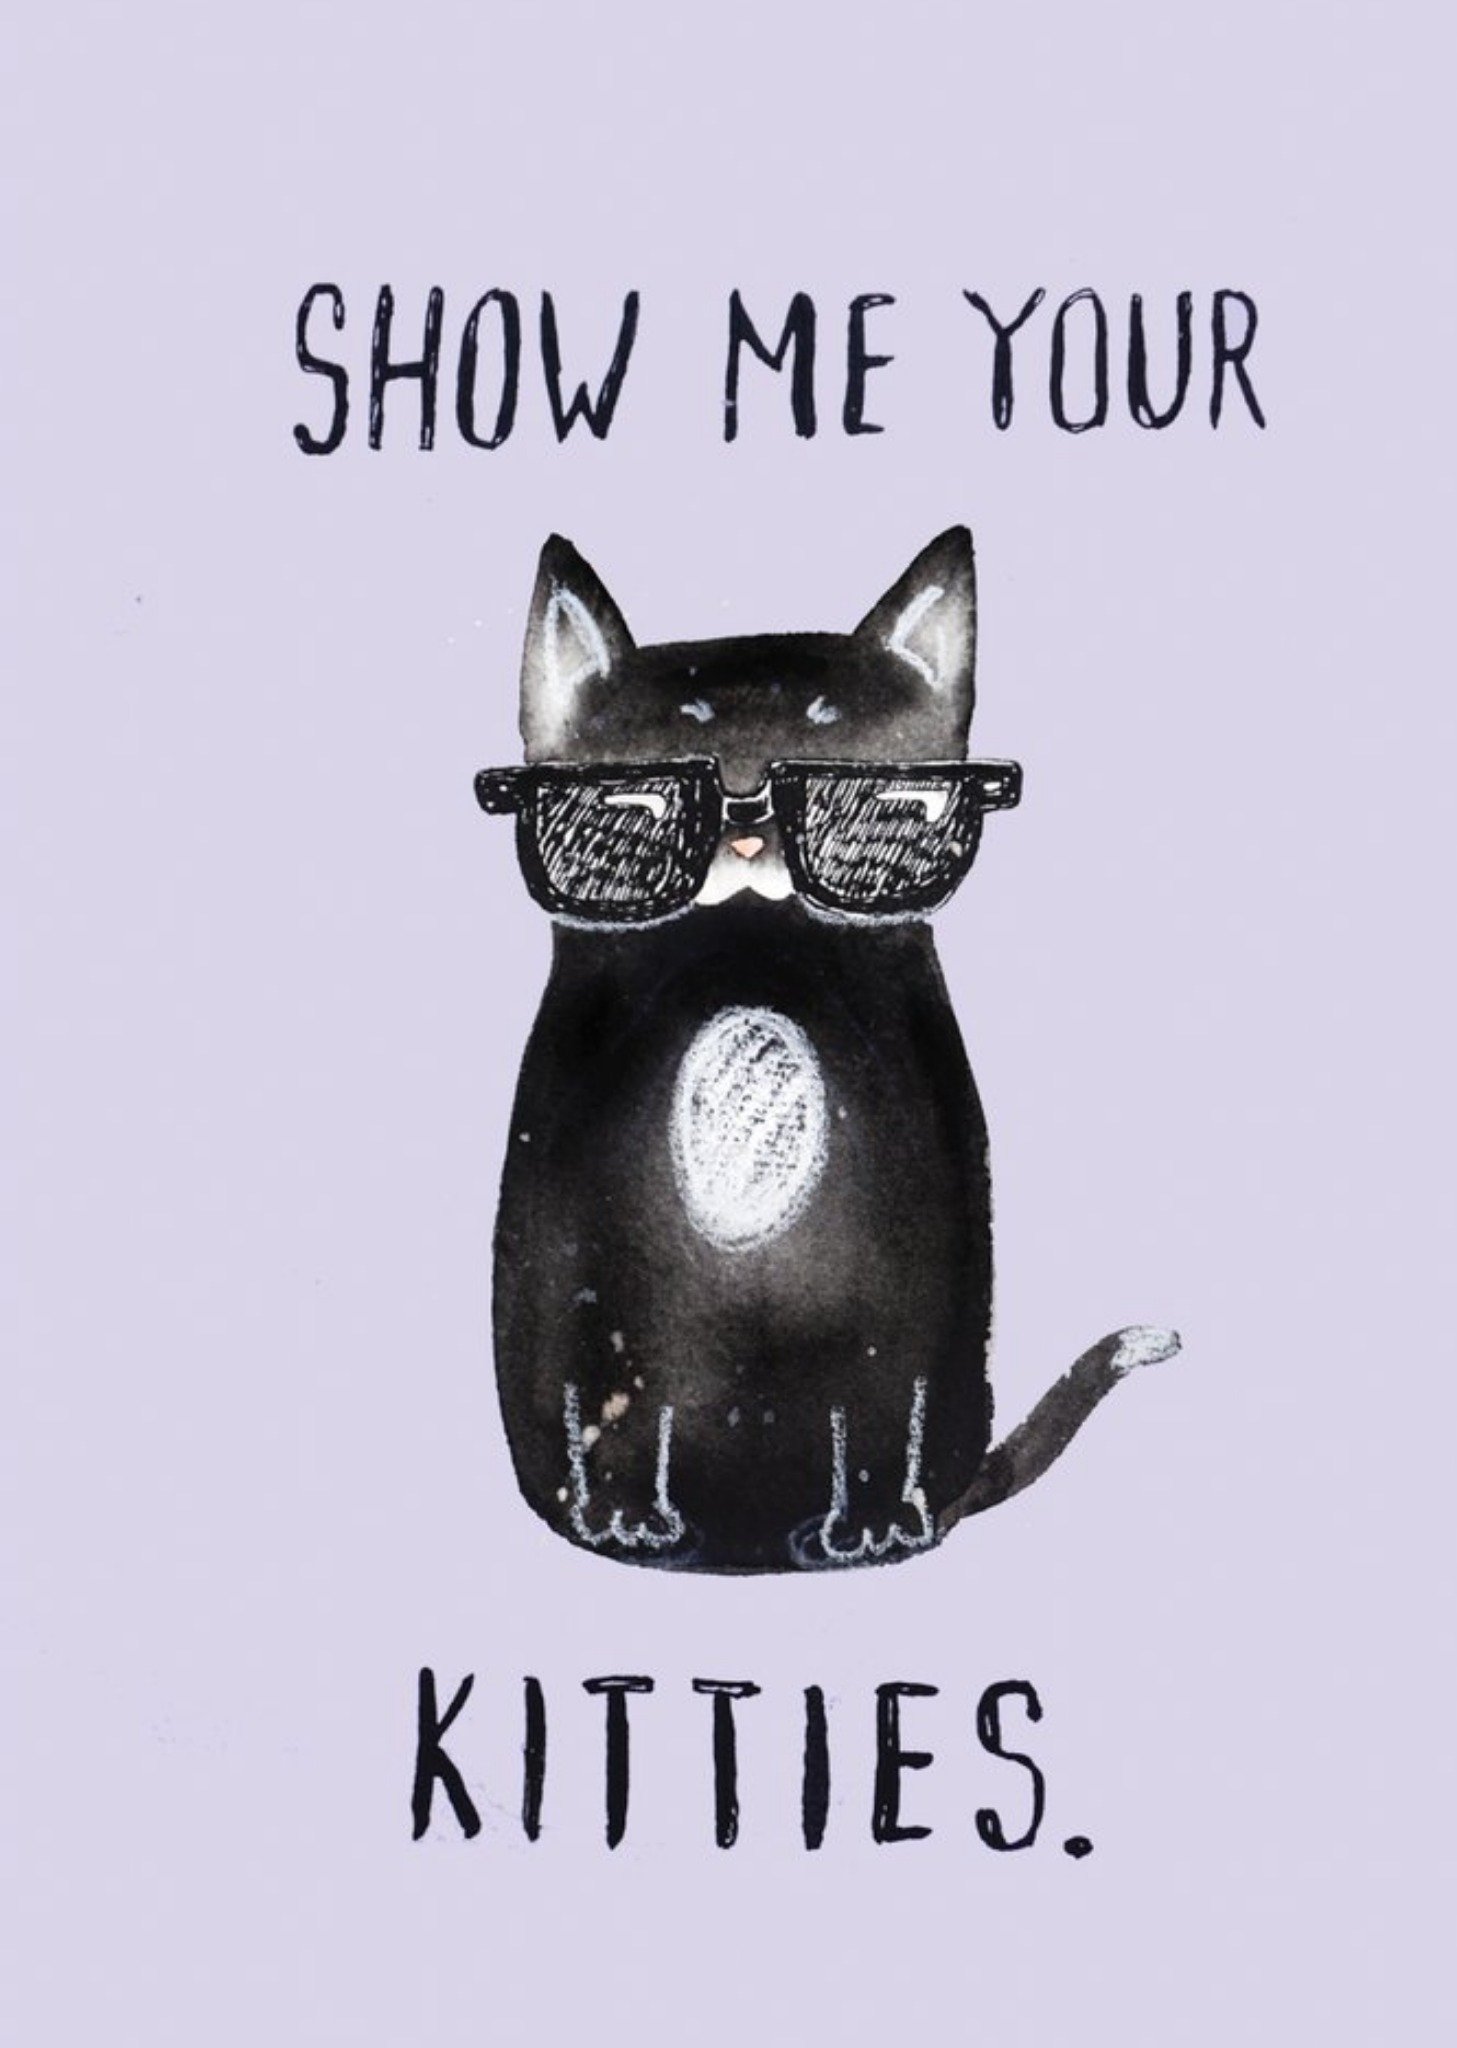 Jolly Awesome Cute Illustration Of A Black Cat Wearing Shades Show Me Your Kitties Funny Pun Valenti